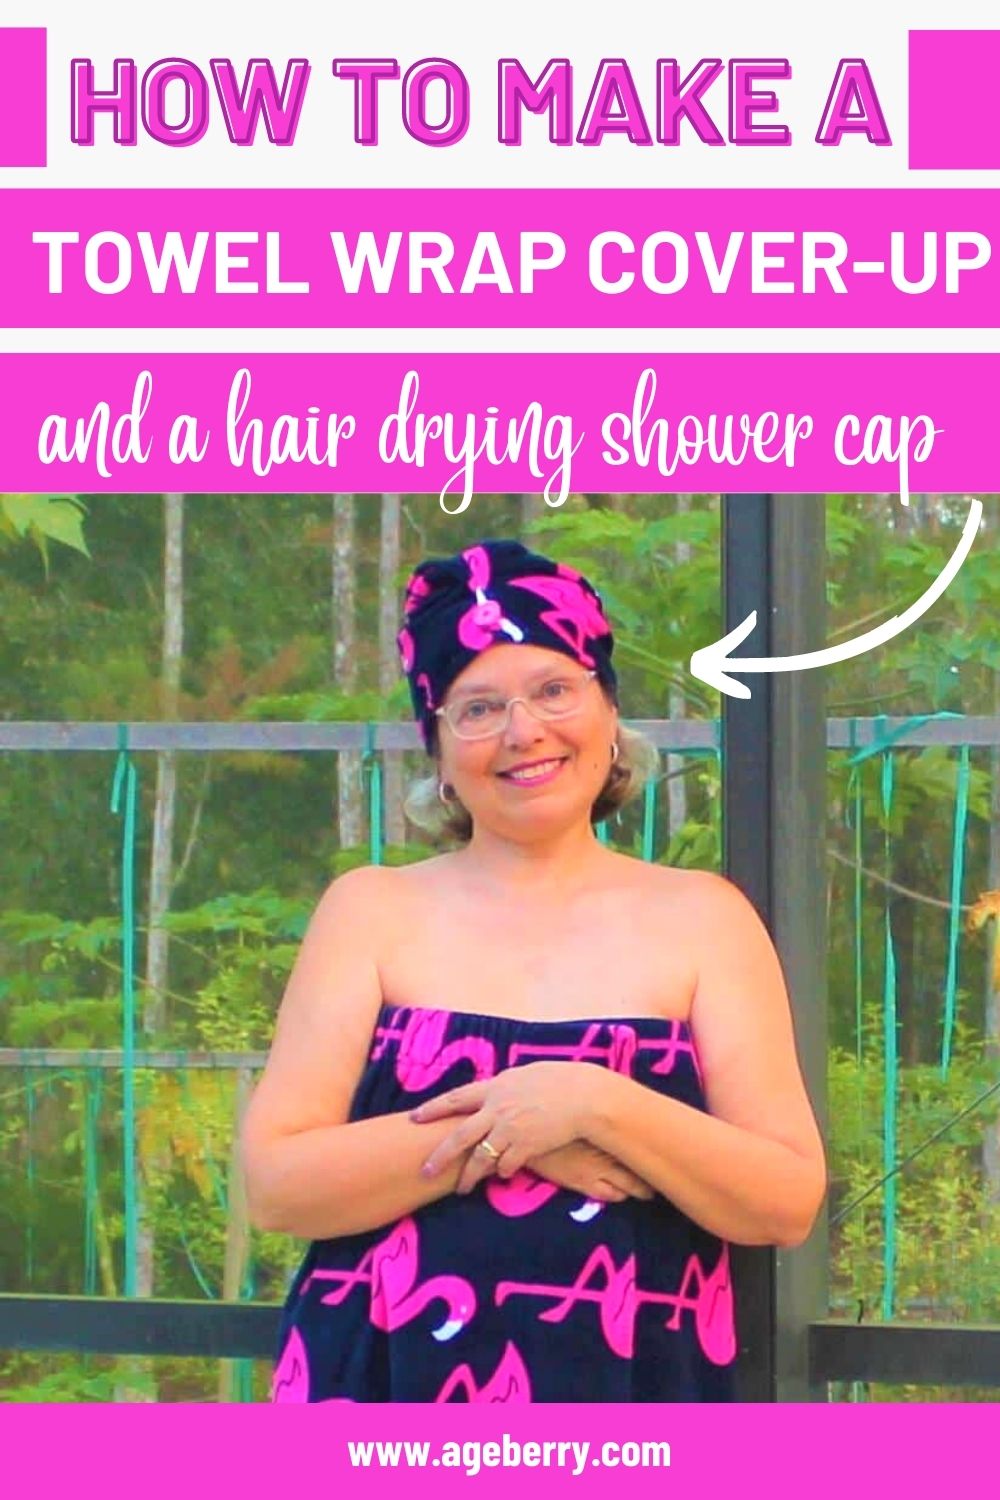 How to make a towel wrap cover-up and a hair drying shower cap from terry towels –